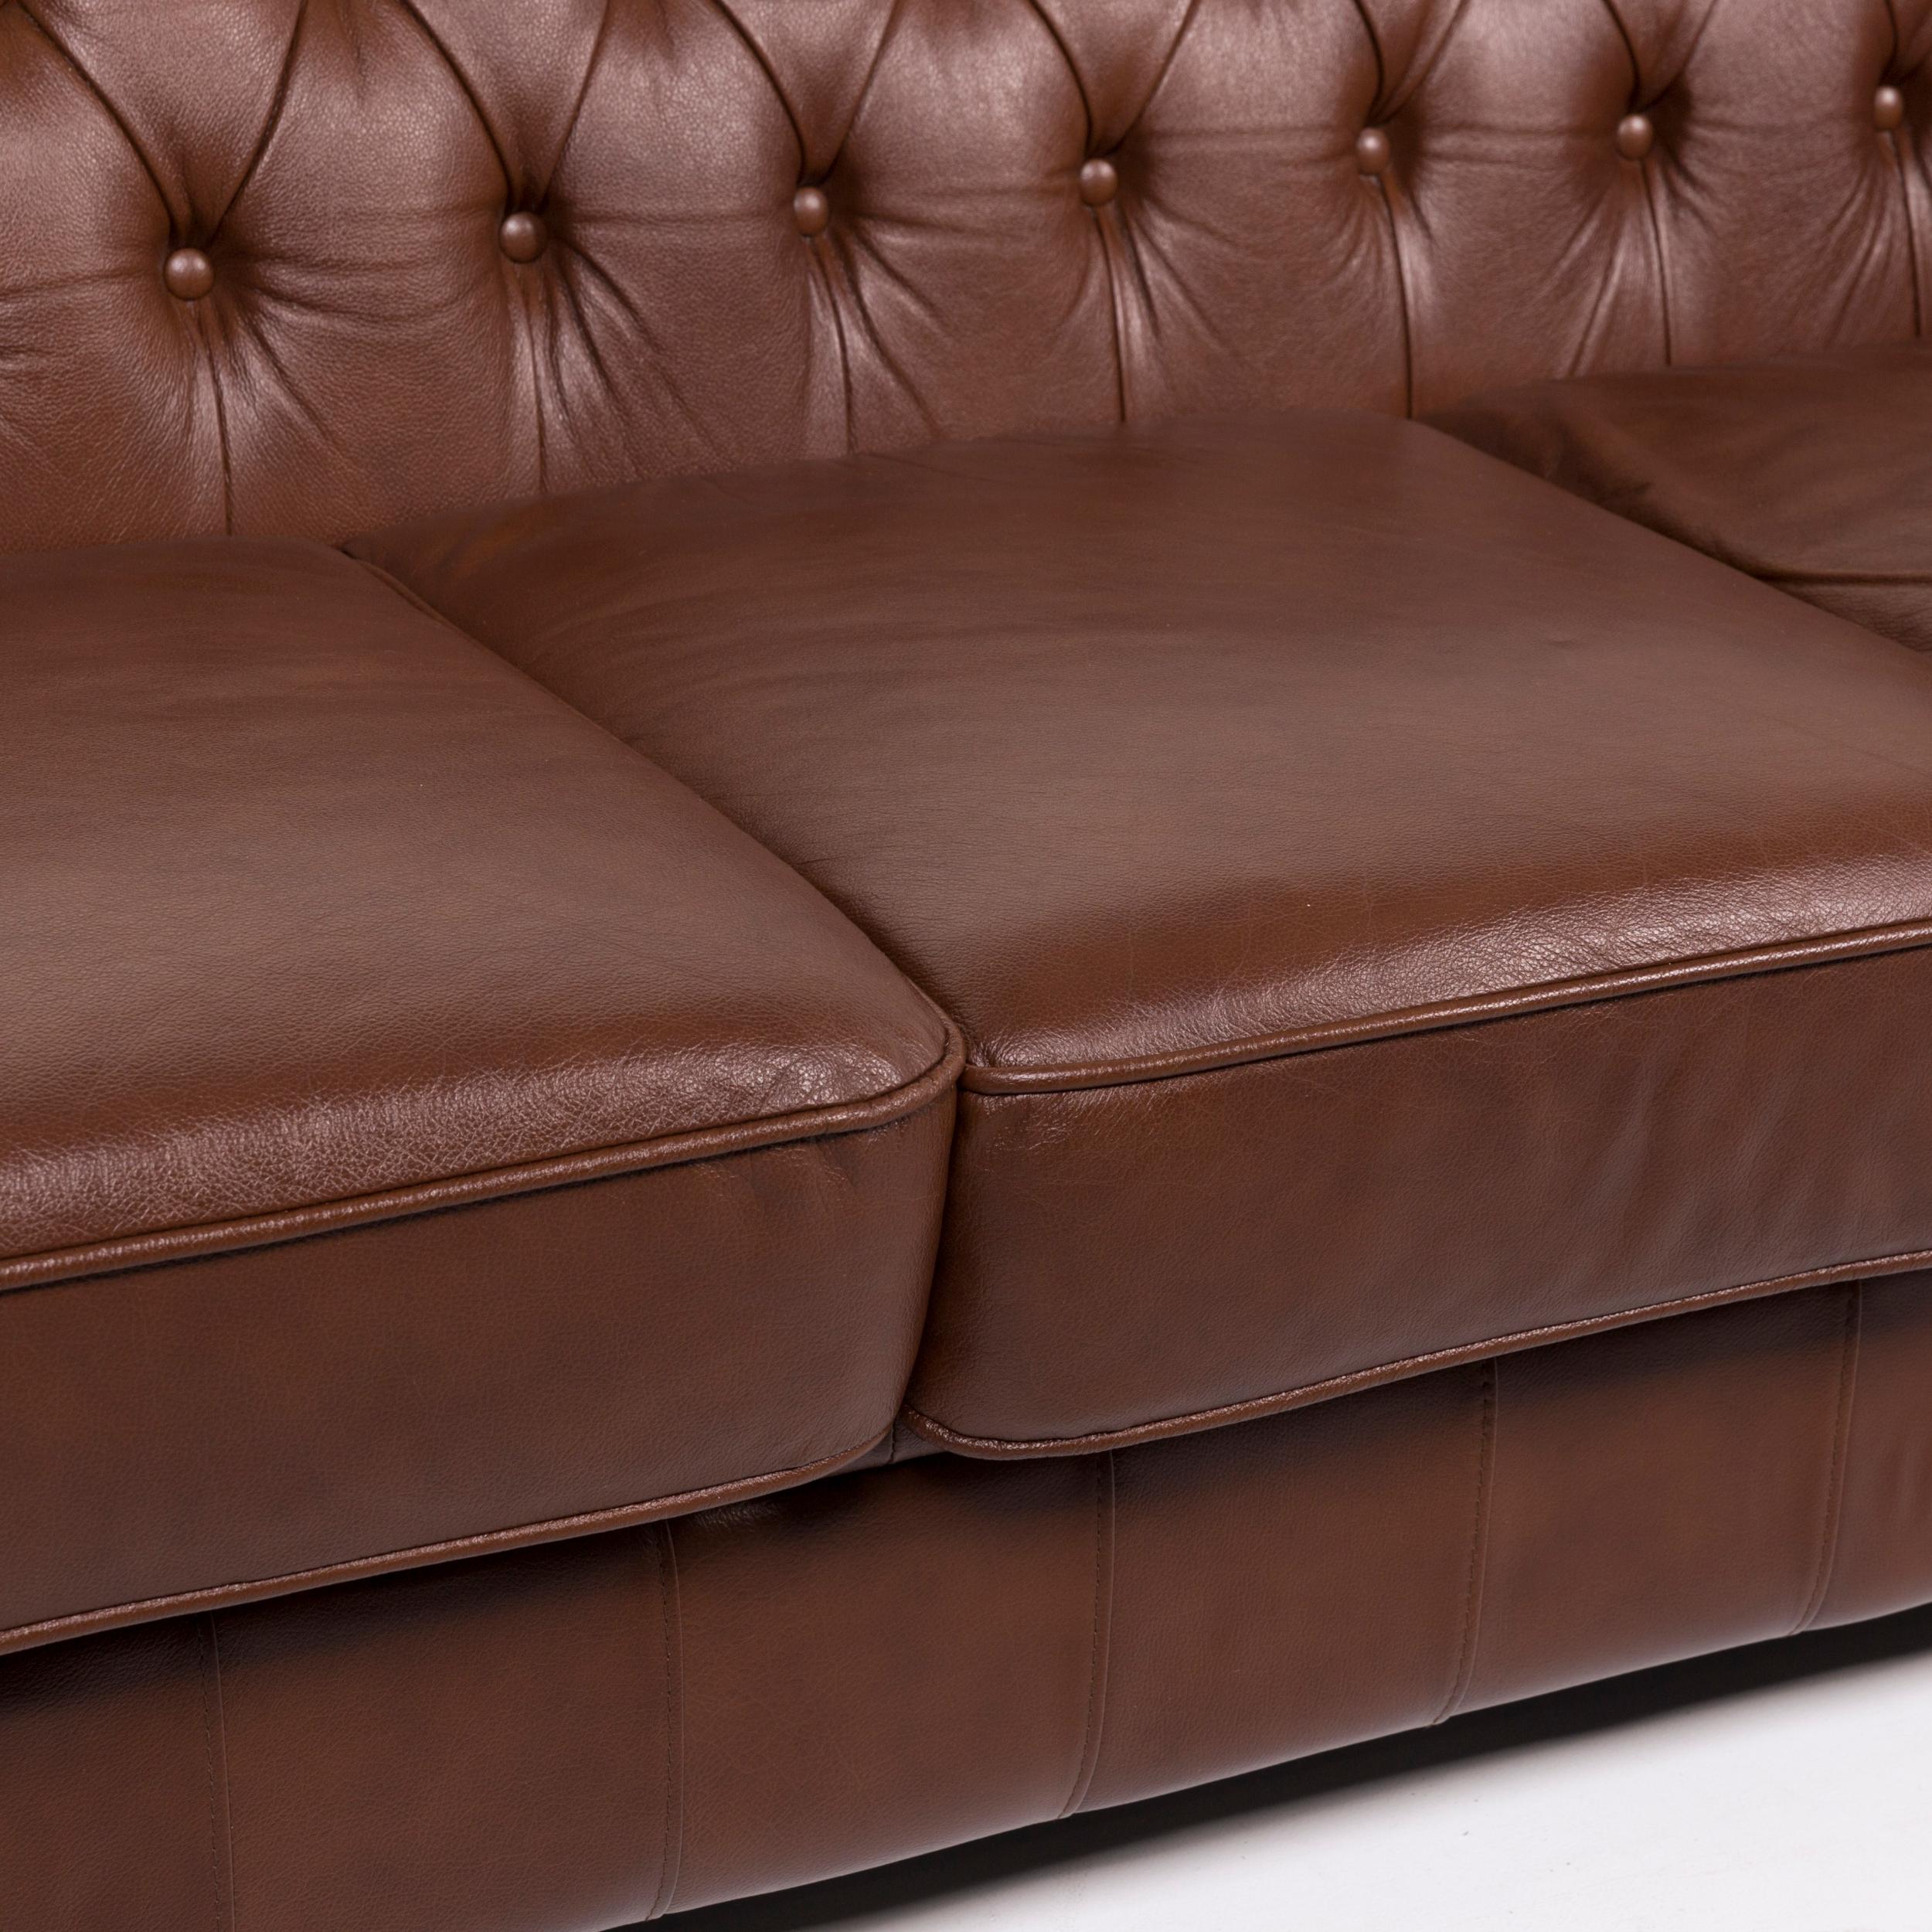 We bring to you a Chesterfield leather sofa brown three-seat.
   
 

 Product measurements in centimeters:
 

Depth 94
Width 170
Height 73
Seat-height 44
Rest-height 72
Seat-depth 57
Seat-width 136
Back-height 31.